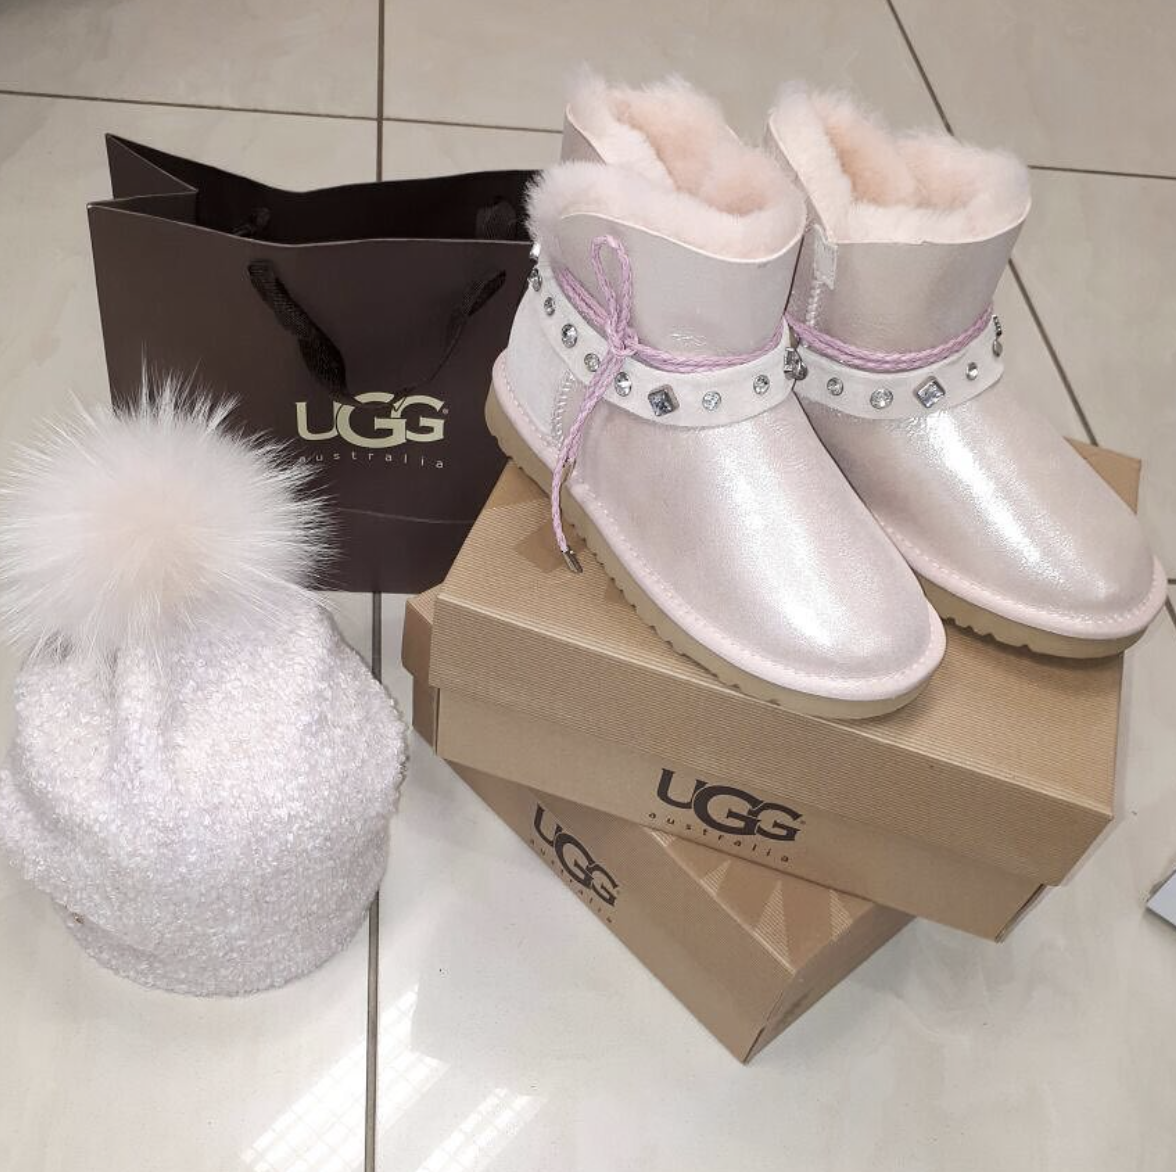 Uggs with rhinestones are no longer in fashion.